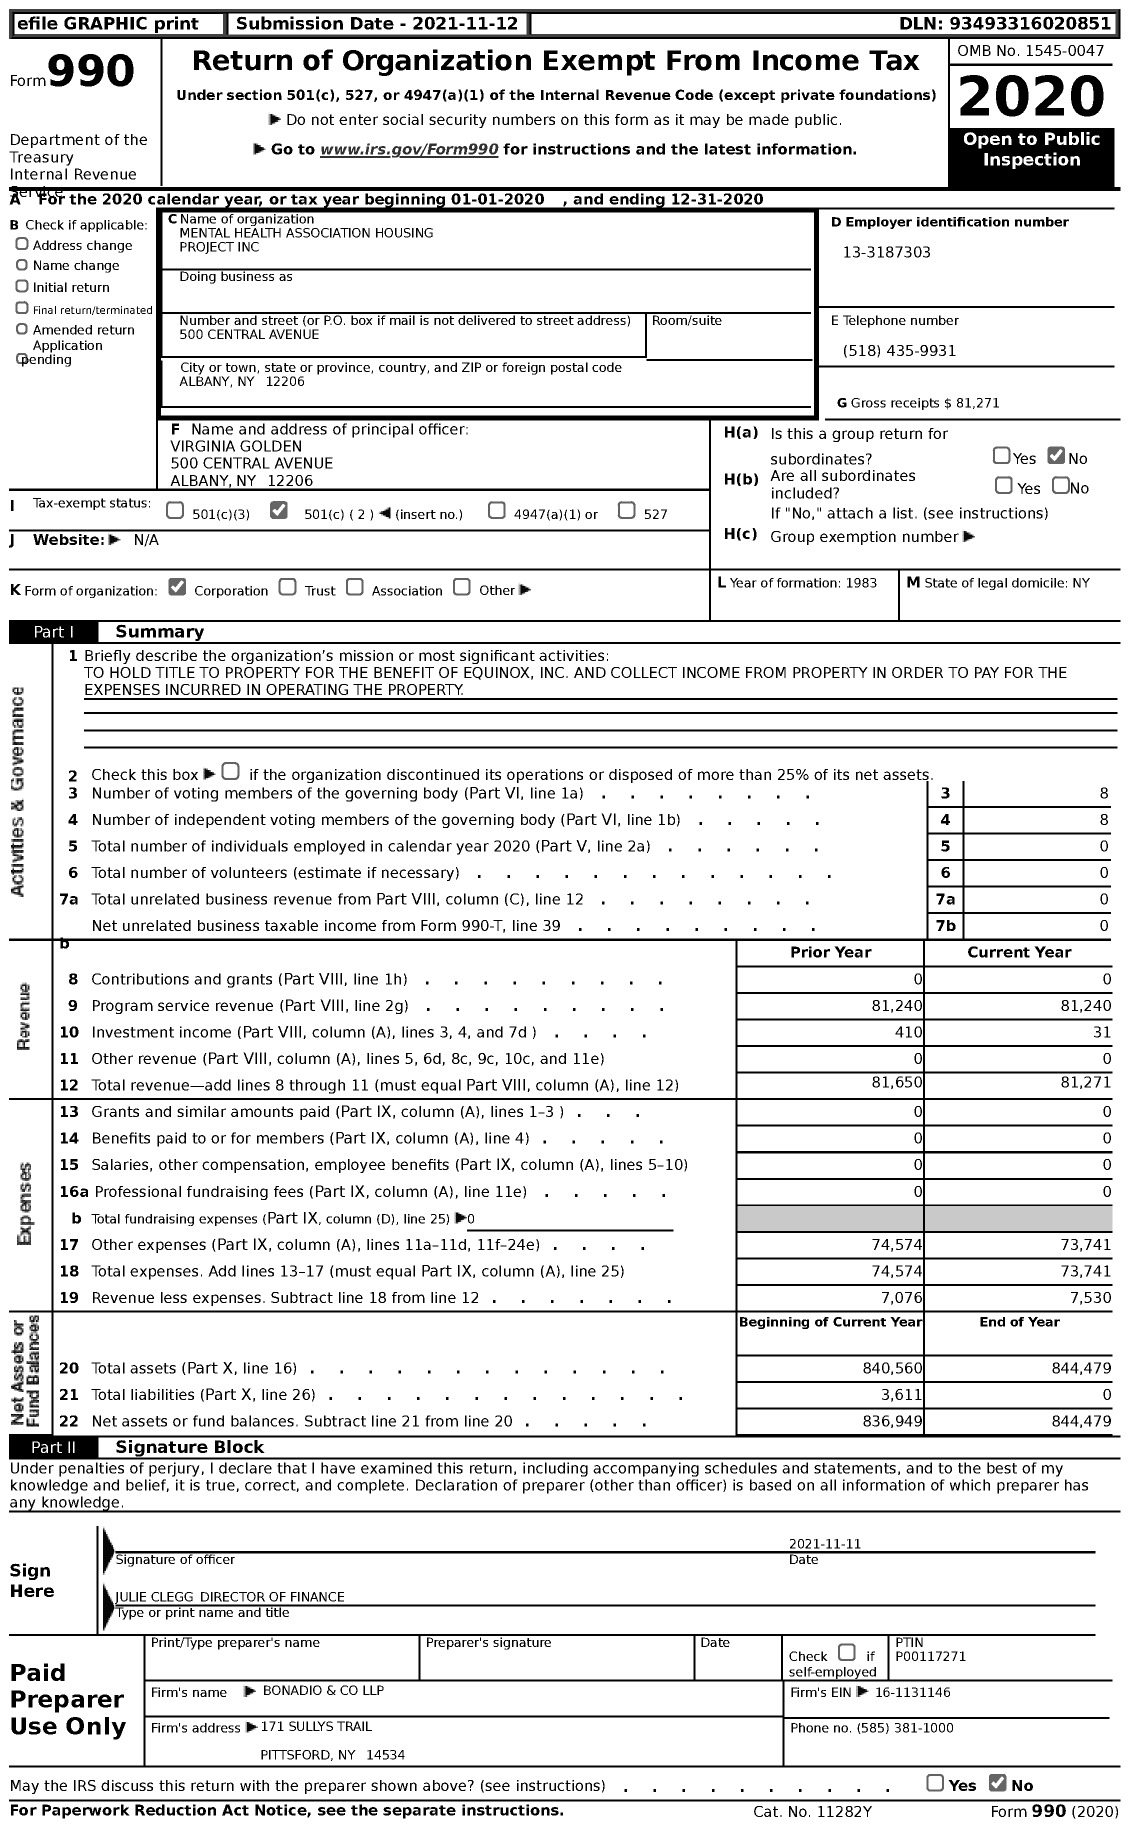 Image of first page of 2020 Form 990 for Mental Health Association Housing Project